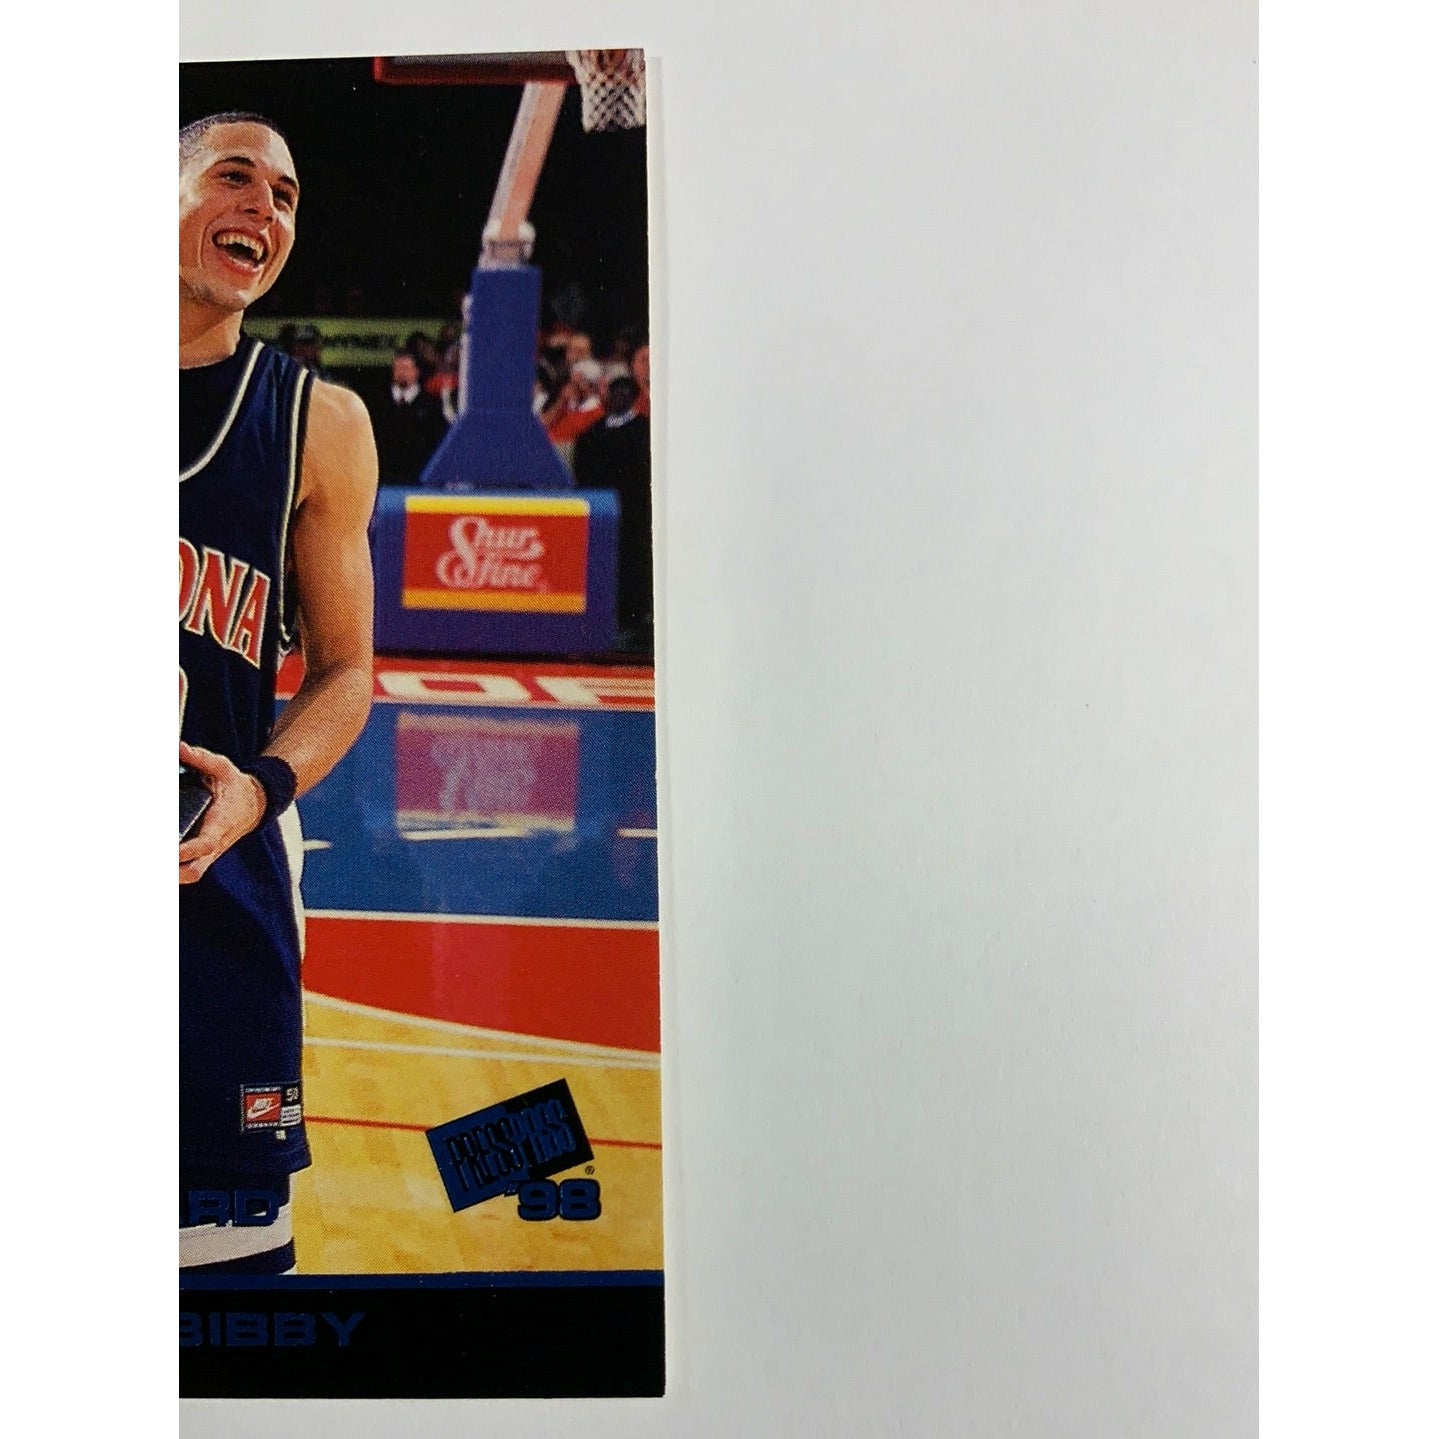 1998 Press Pass Collectibles Mike Bibby Arizona Wildcats-Local Legends Cards & Collectibles